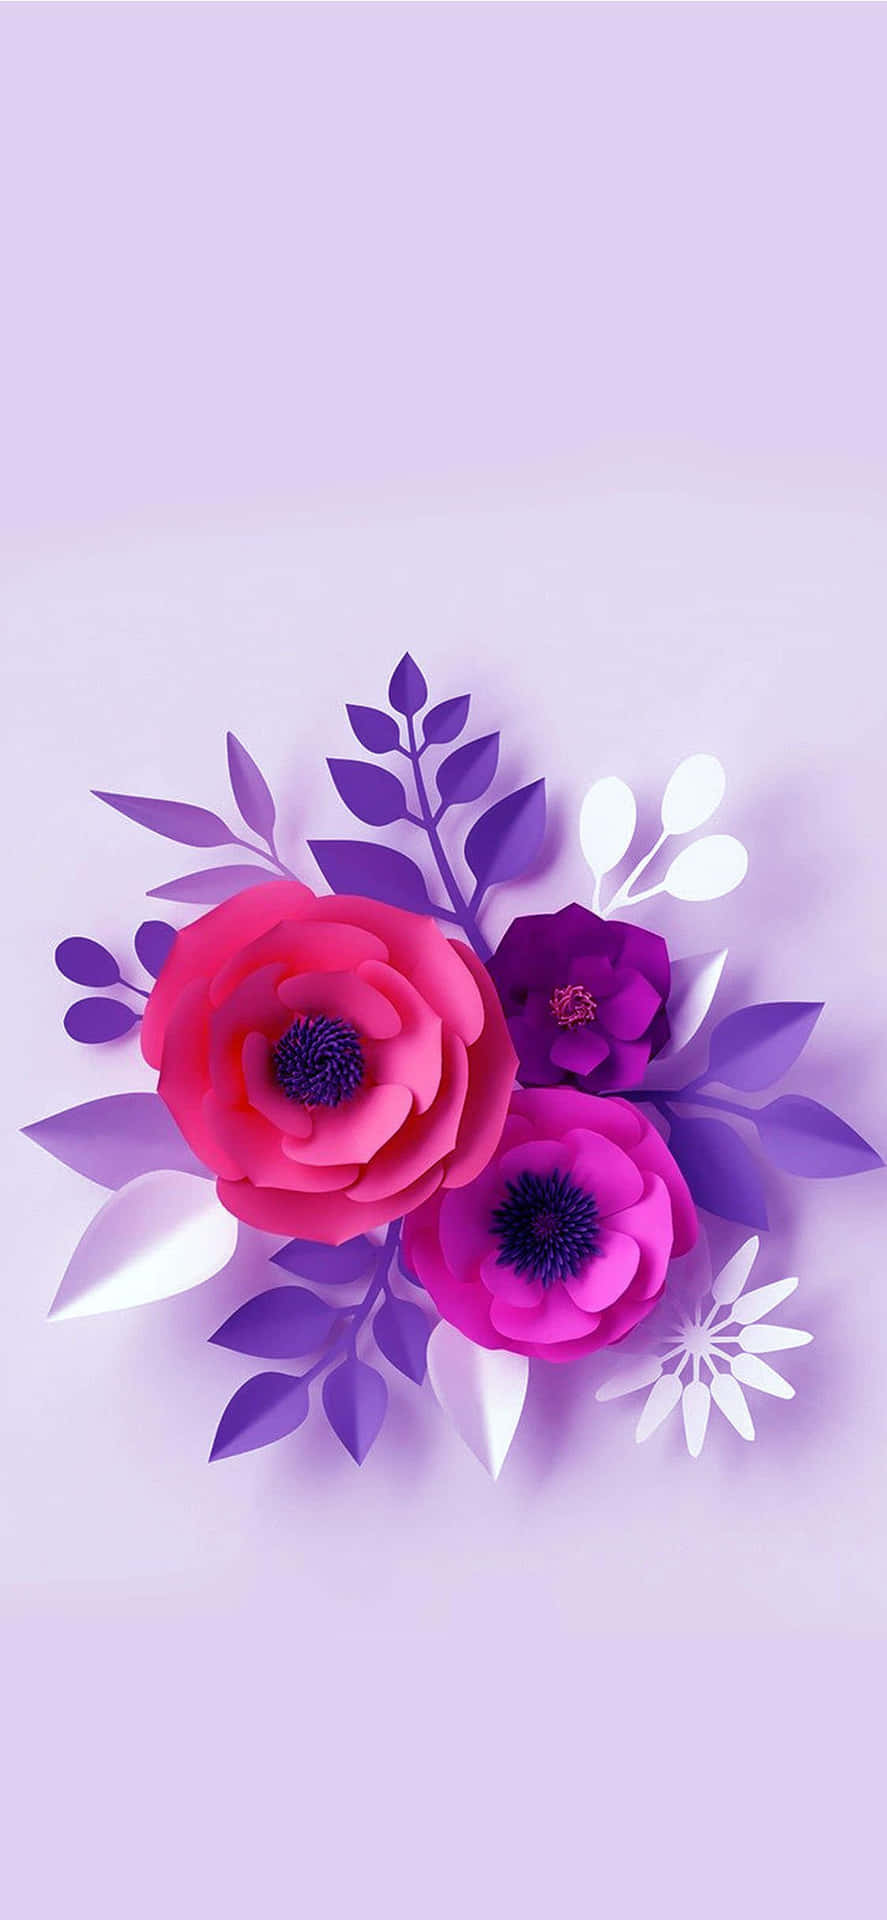 A colorful arrangement of flowers against the backdrop of an iPhone. Wallpaper